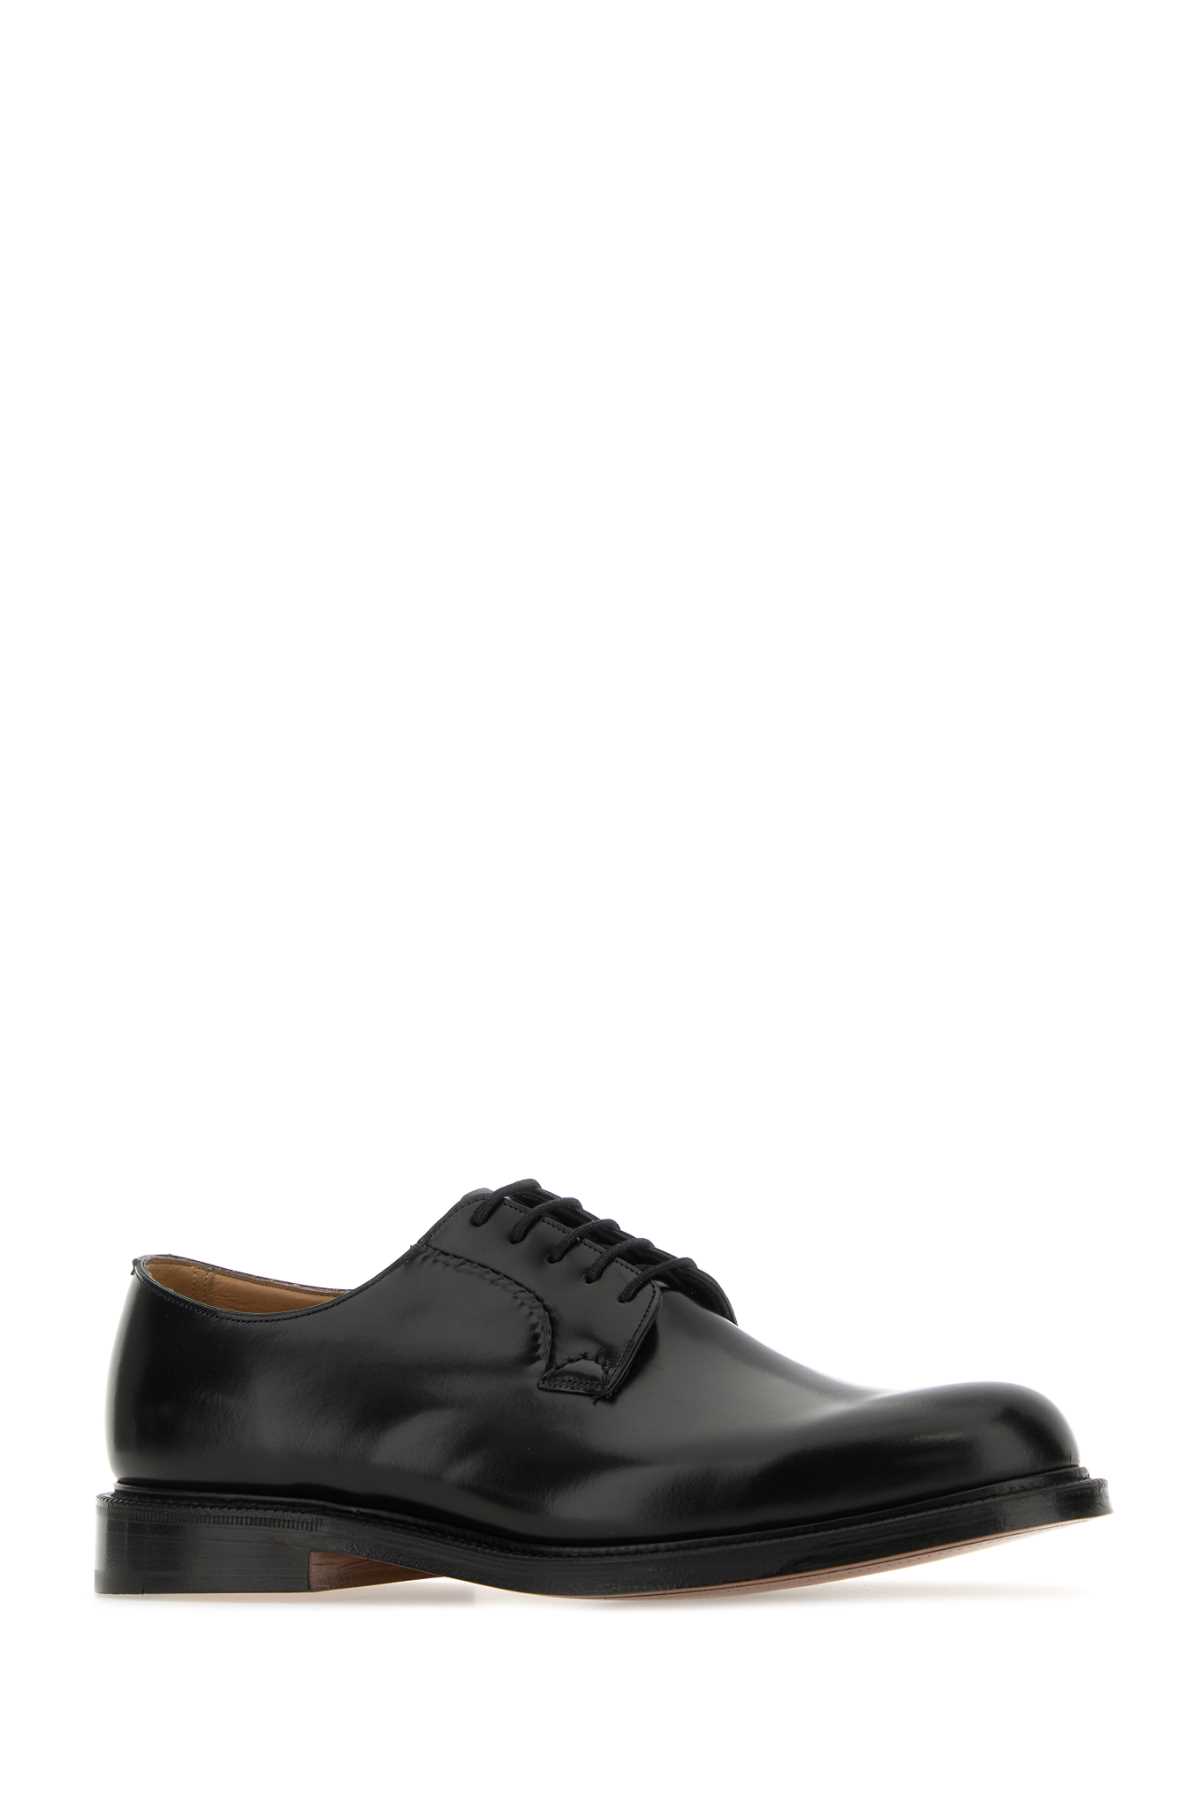 CHURCH'S BLACK LEATHER SHANNON LACE-UP SHOES